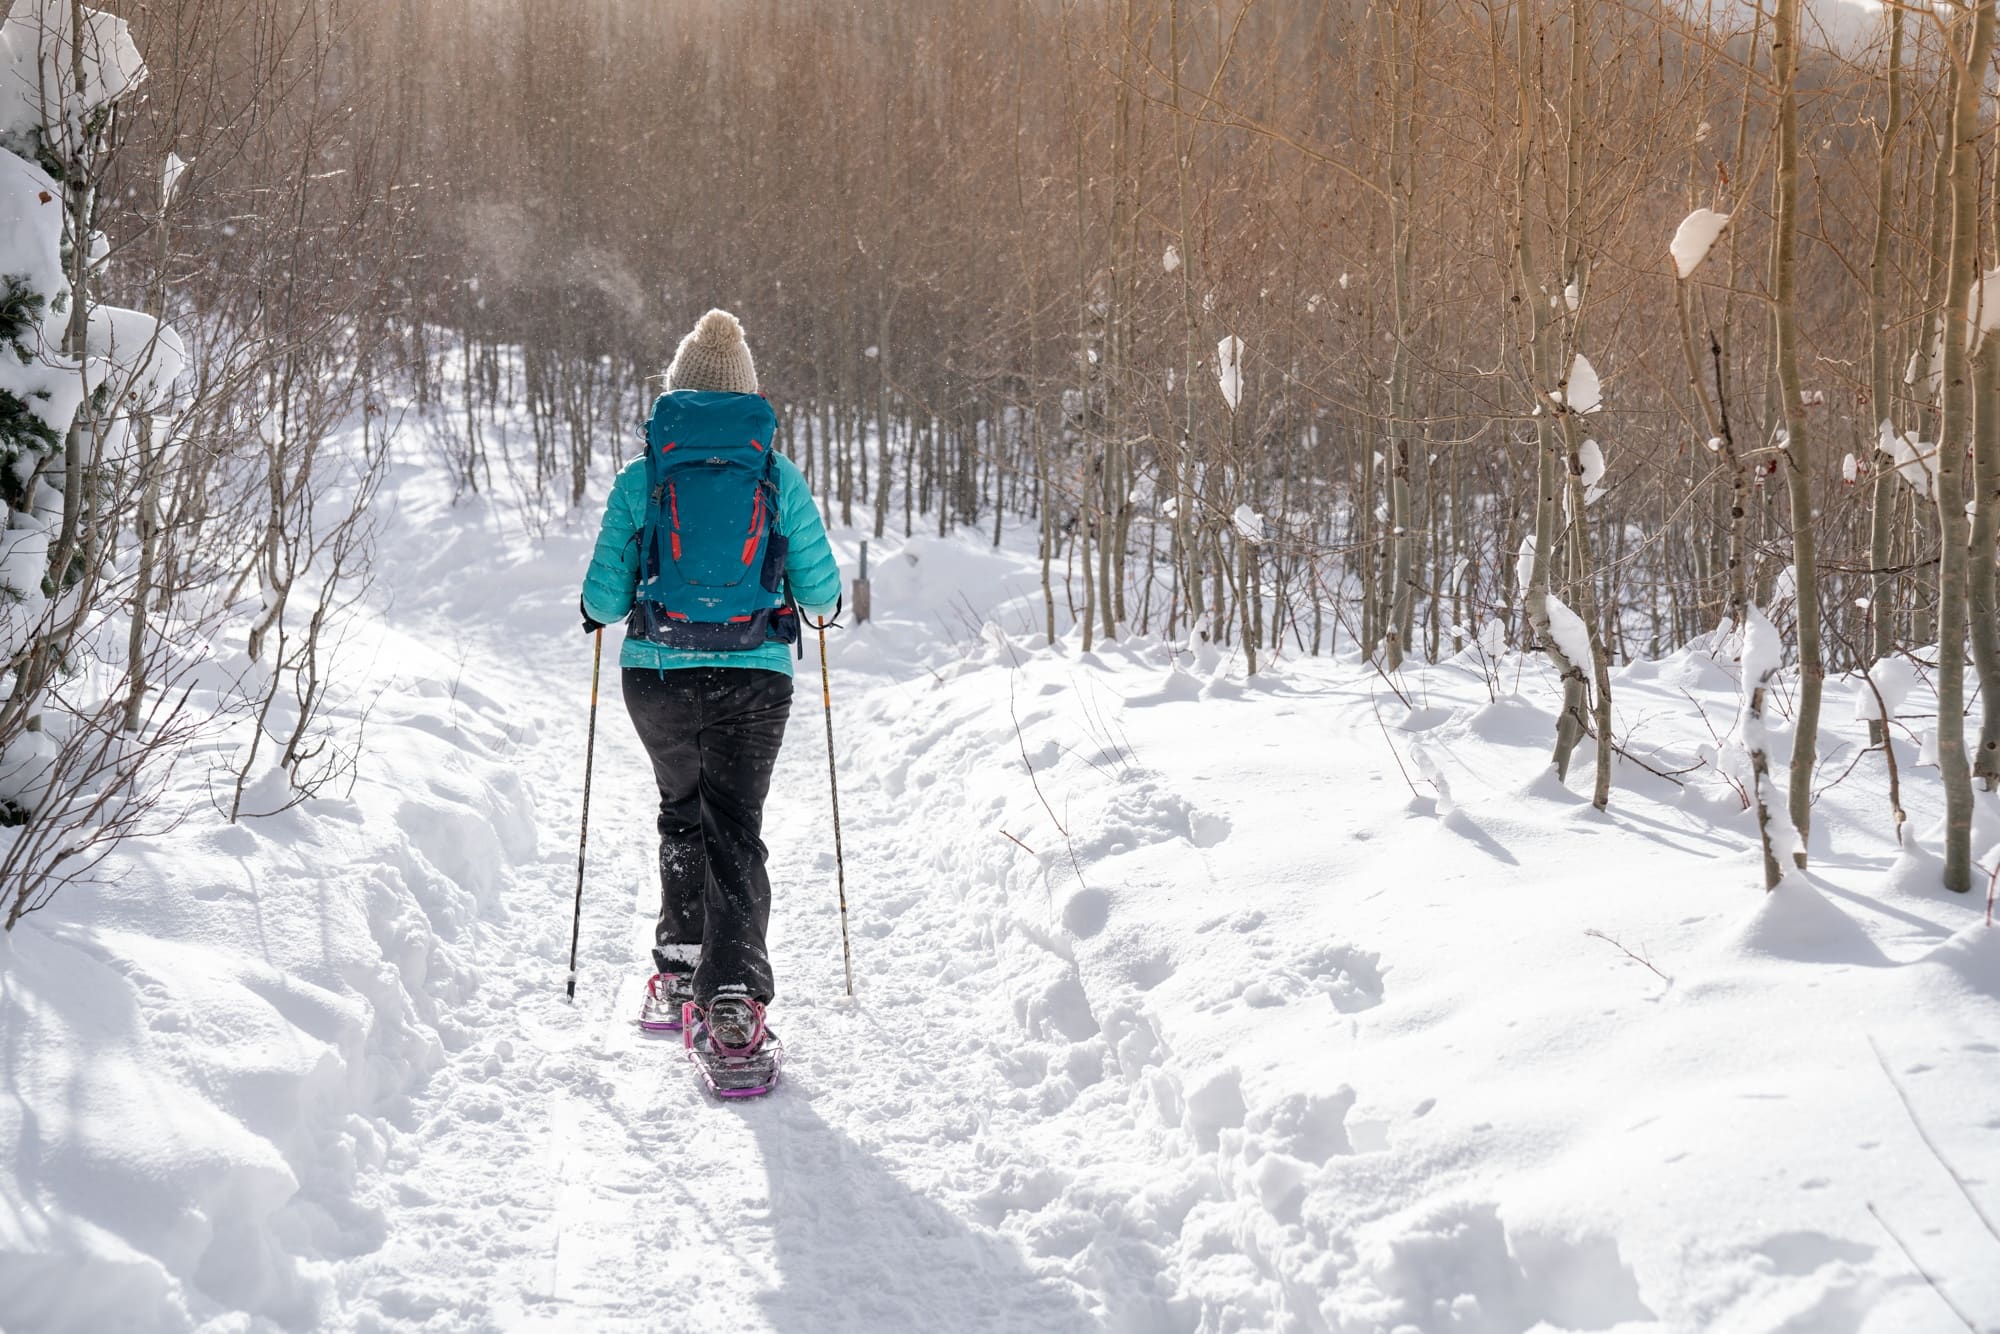 How to Snowshoe: Beginner Tips for Finding a Trail, Gear & More